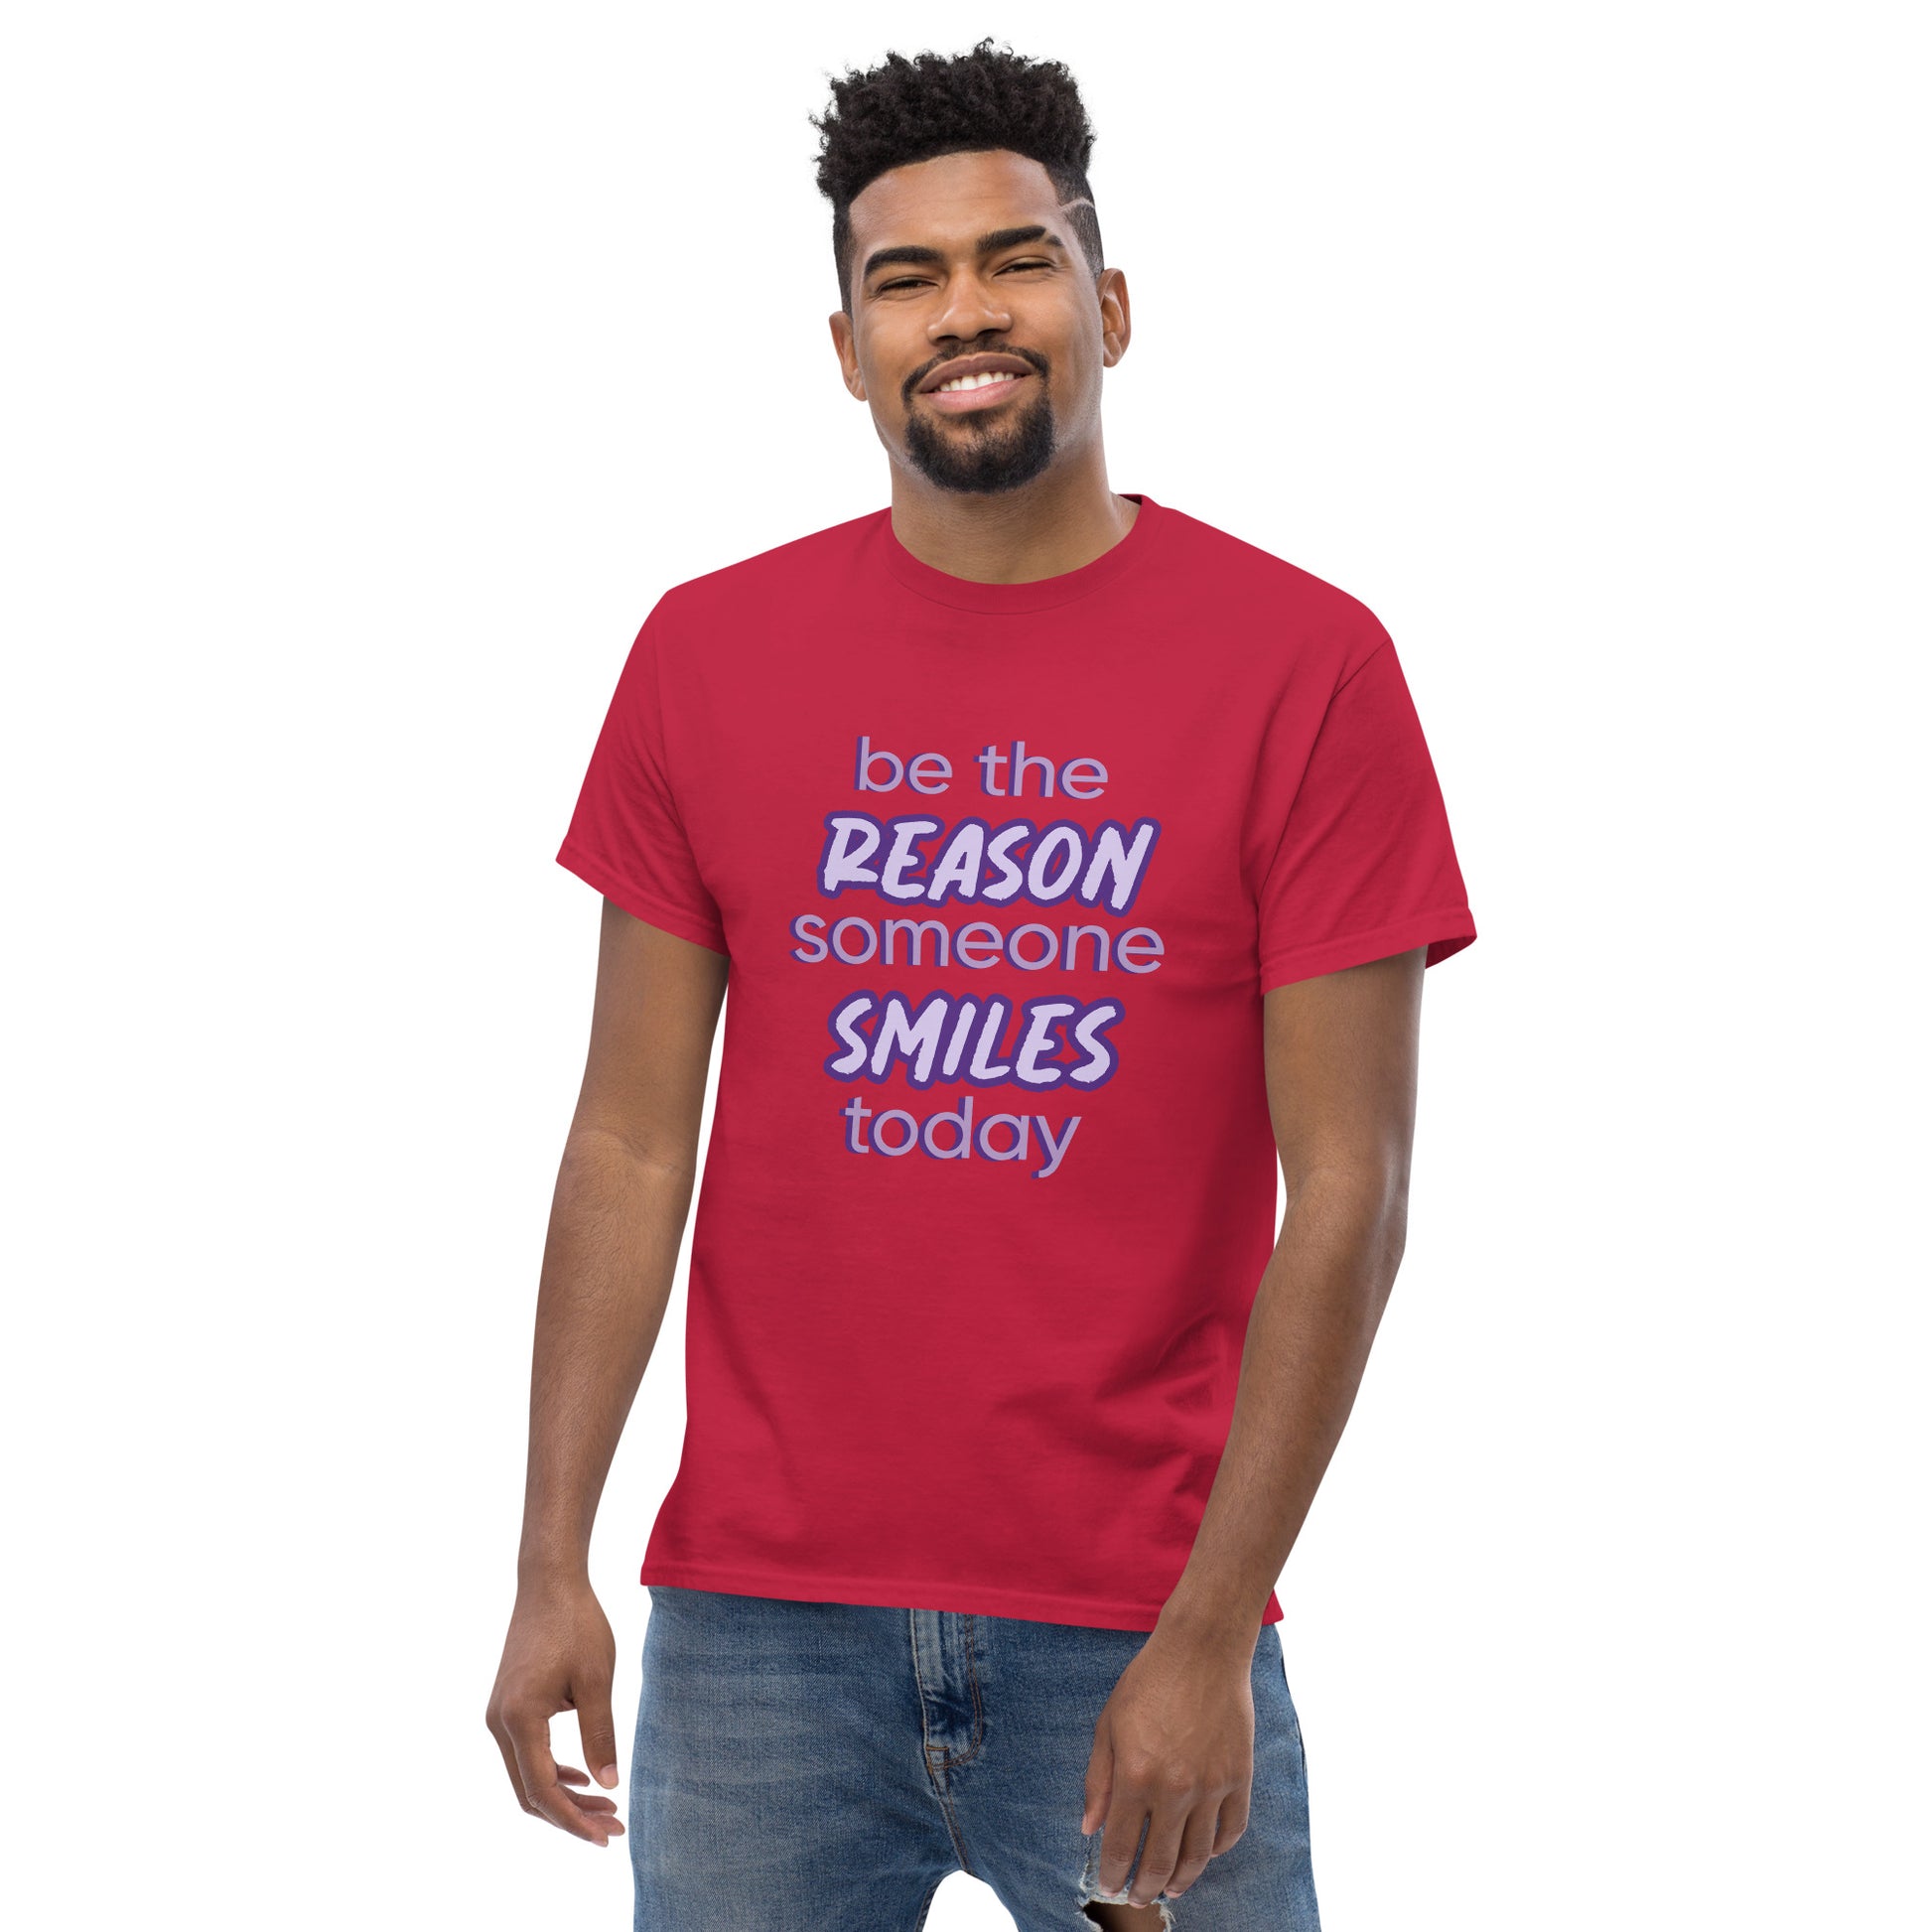 Men with cardinal T-shirt and the quote "be the reason someone smiles today" in purple on it. 